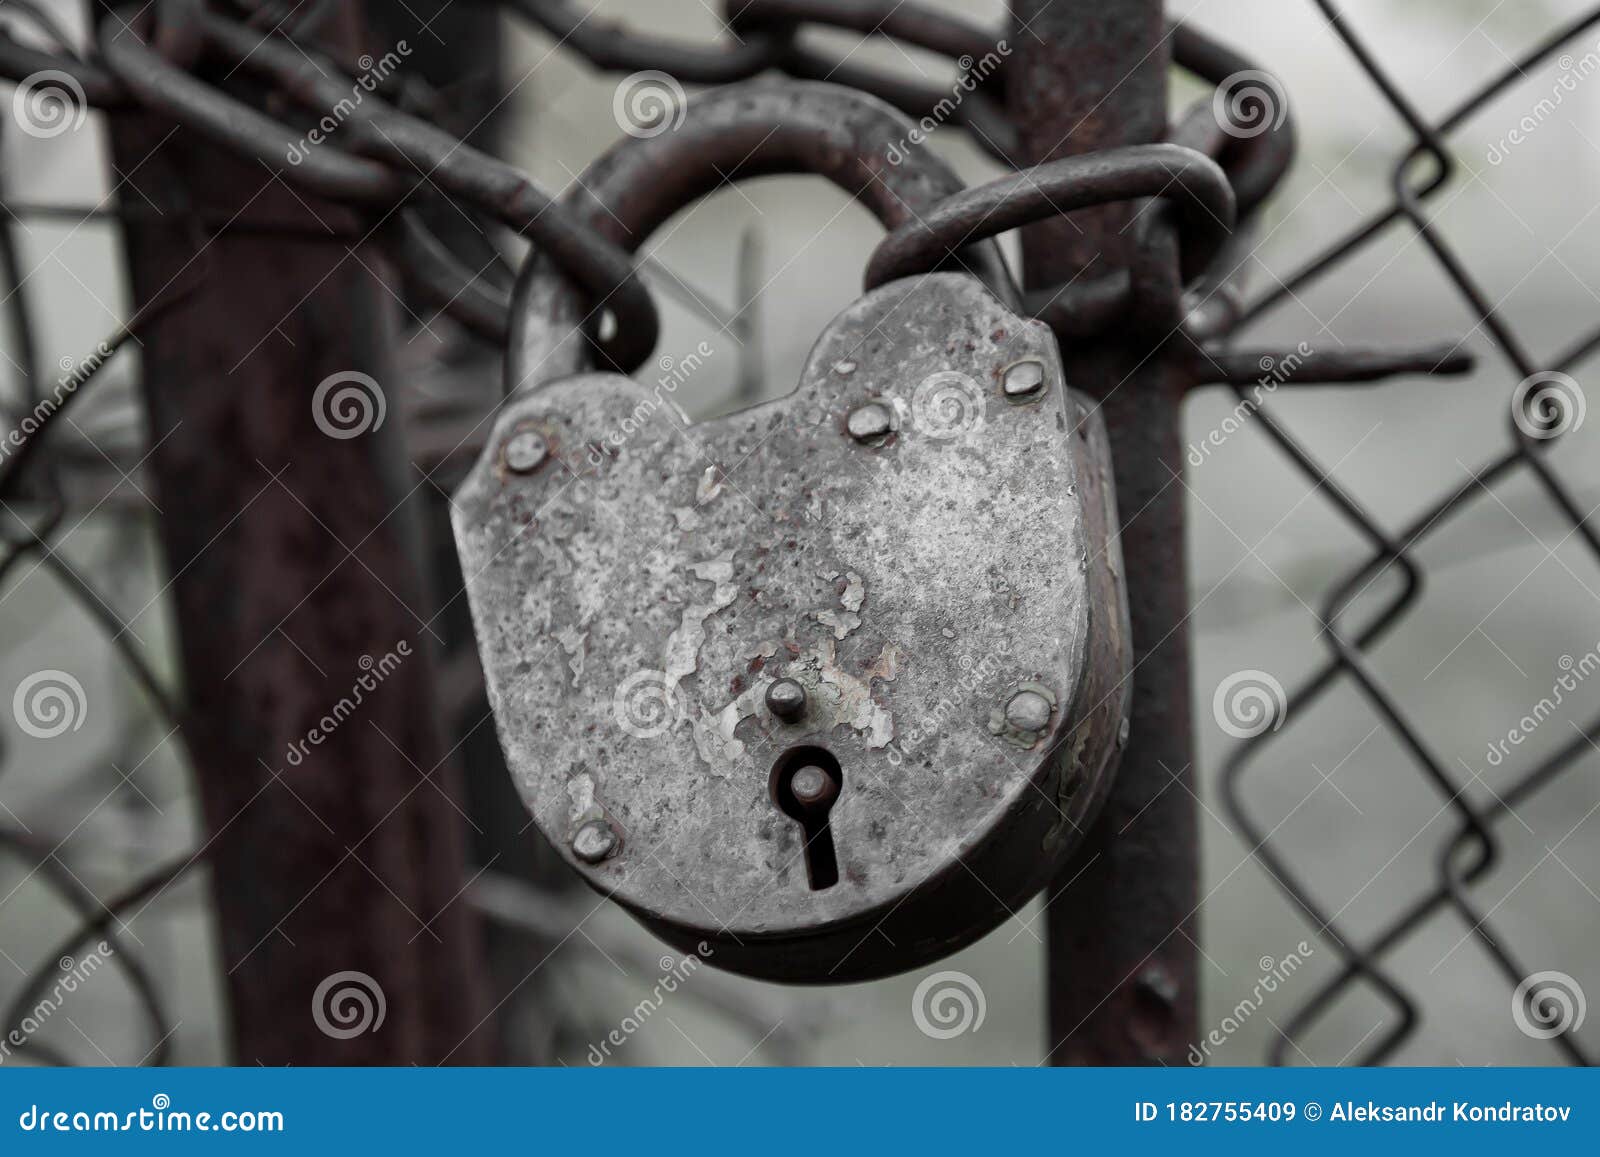 A Close-up Of An Old Locked Iron Lock With Traces Of Paint On A Thick ...